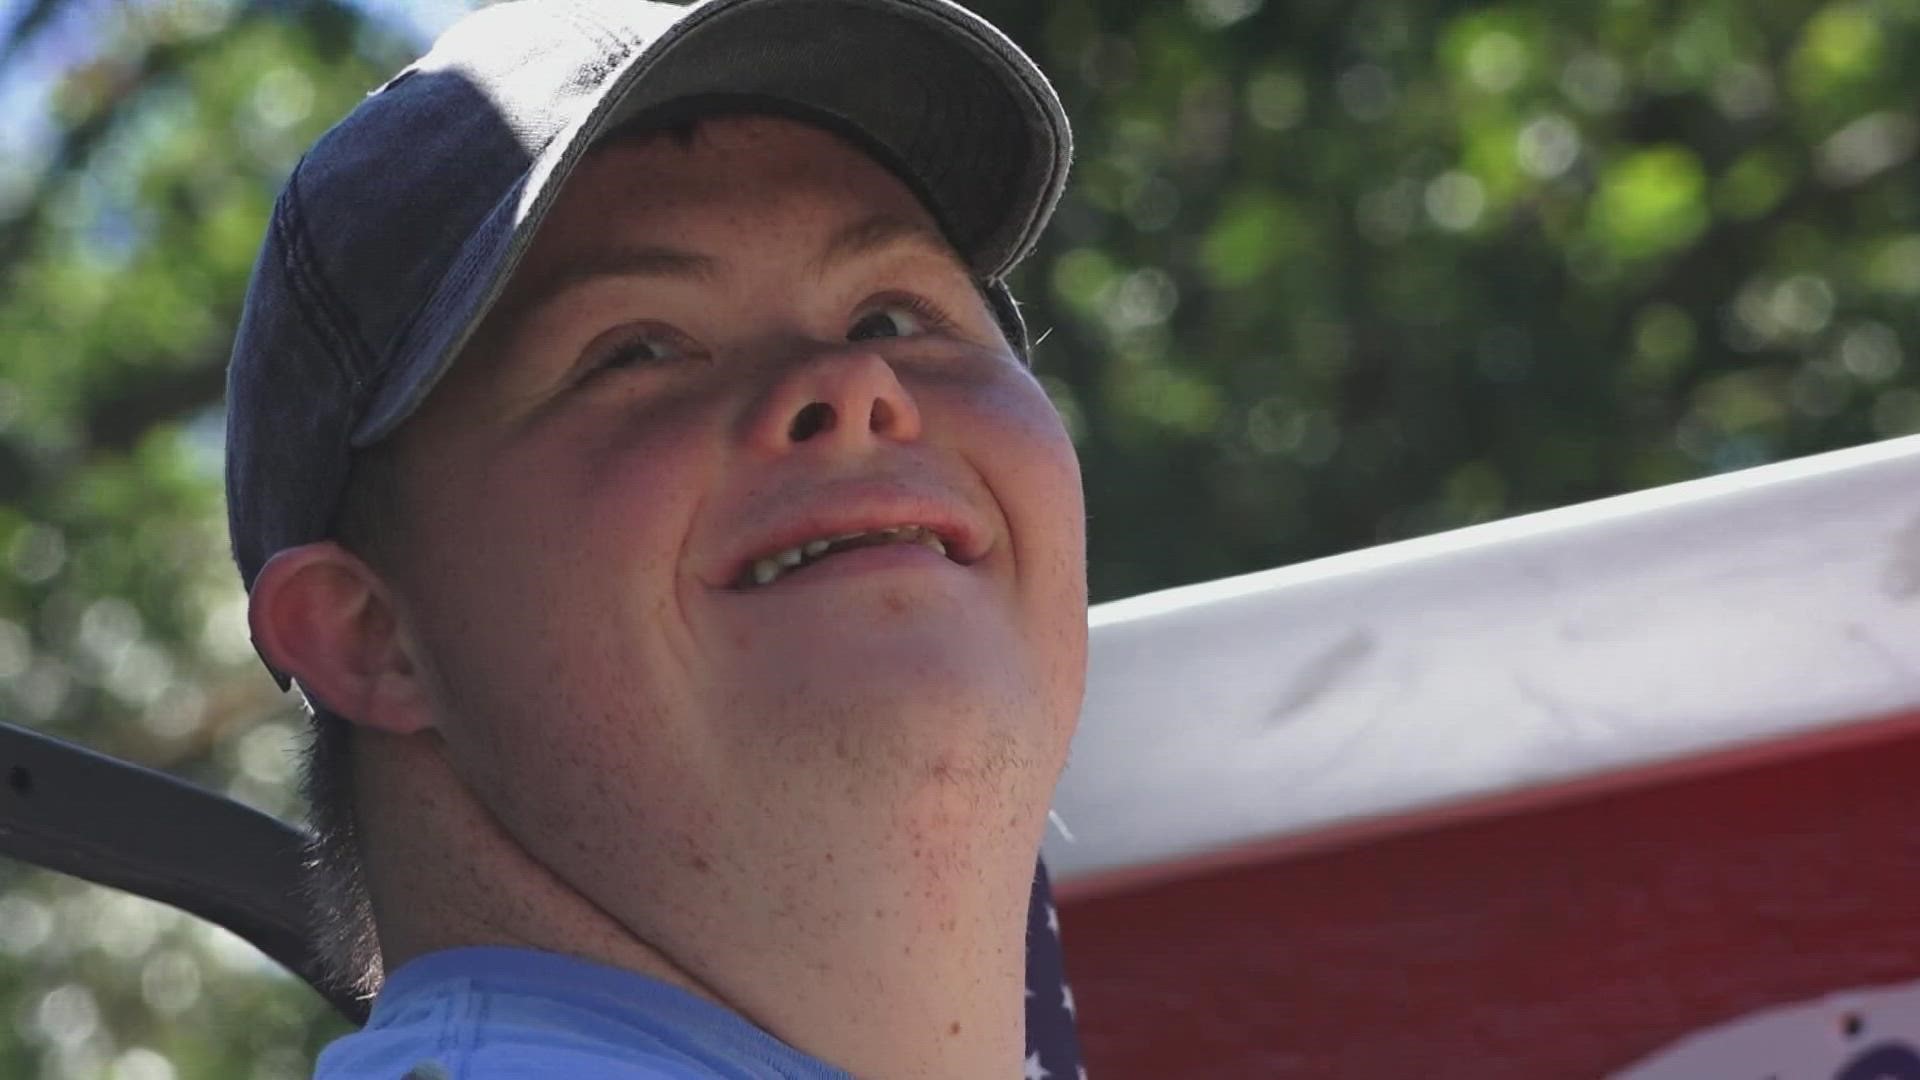 Trey Evans may sell chips and candy, but the smiles are always free.